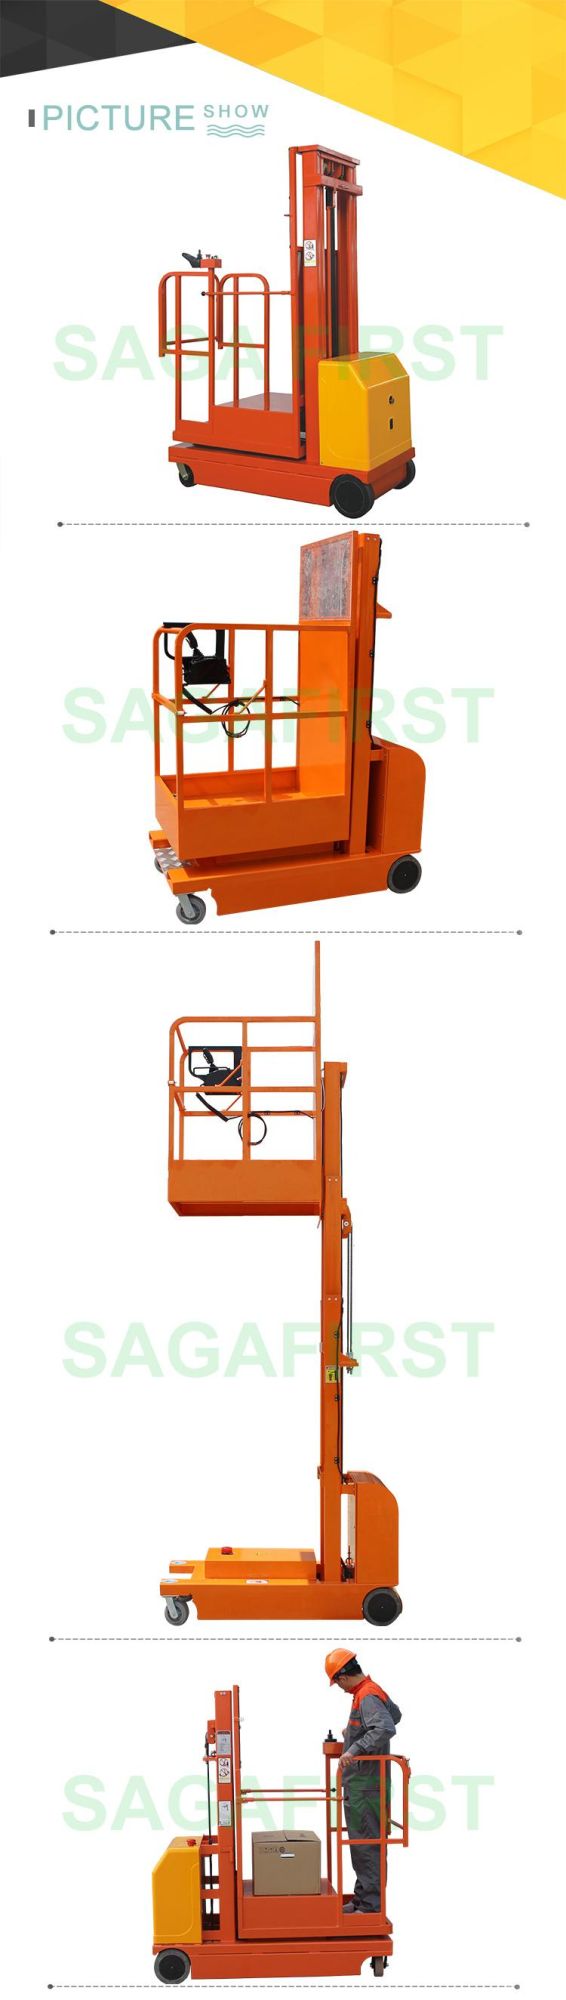 Europe Standard Electric Hydraulic Aerial Order Picker for Sale